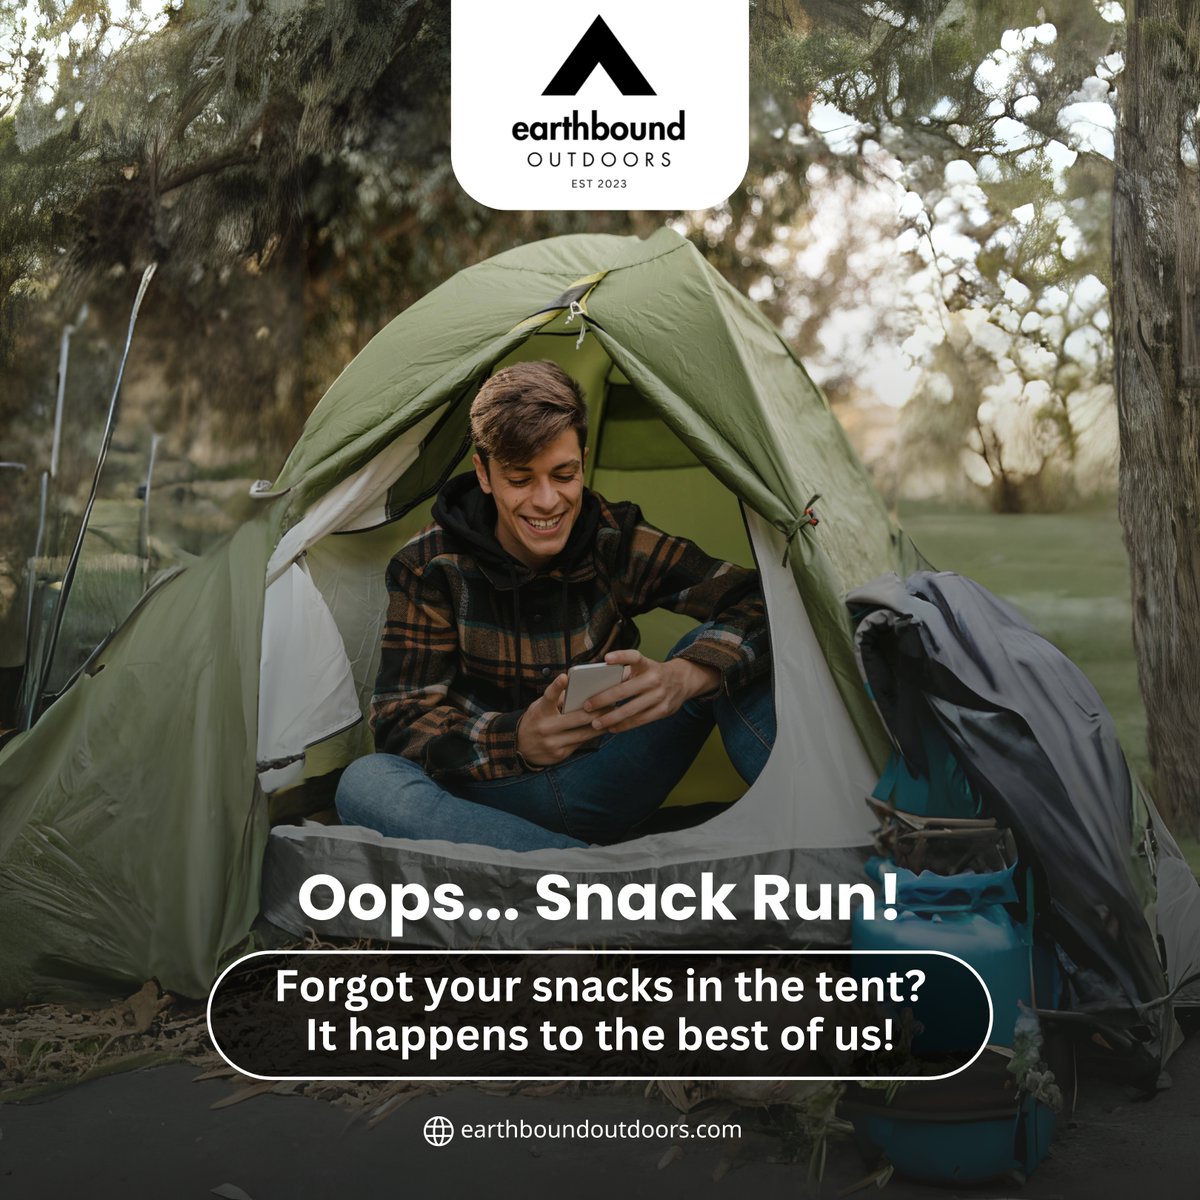 When you realize you left your snacks in the tent... 😱 #OutdoorProblems #CampingLife #NatureLovers #OutdoorLiving #CampingAdventures #WildernessCulture #CampLife #IntoTheWild #CampingTrip